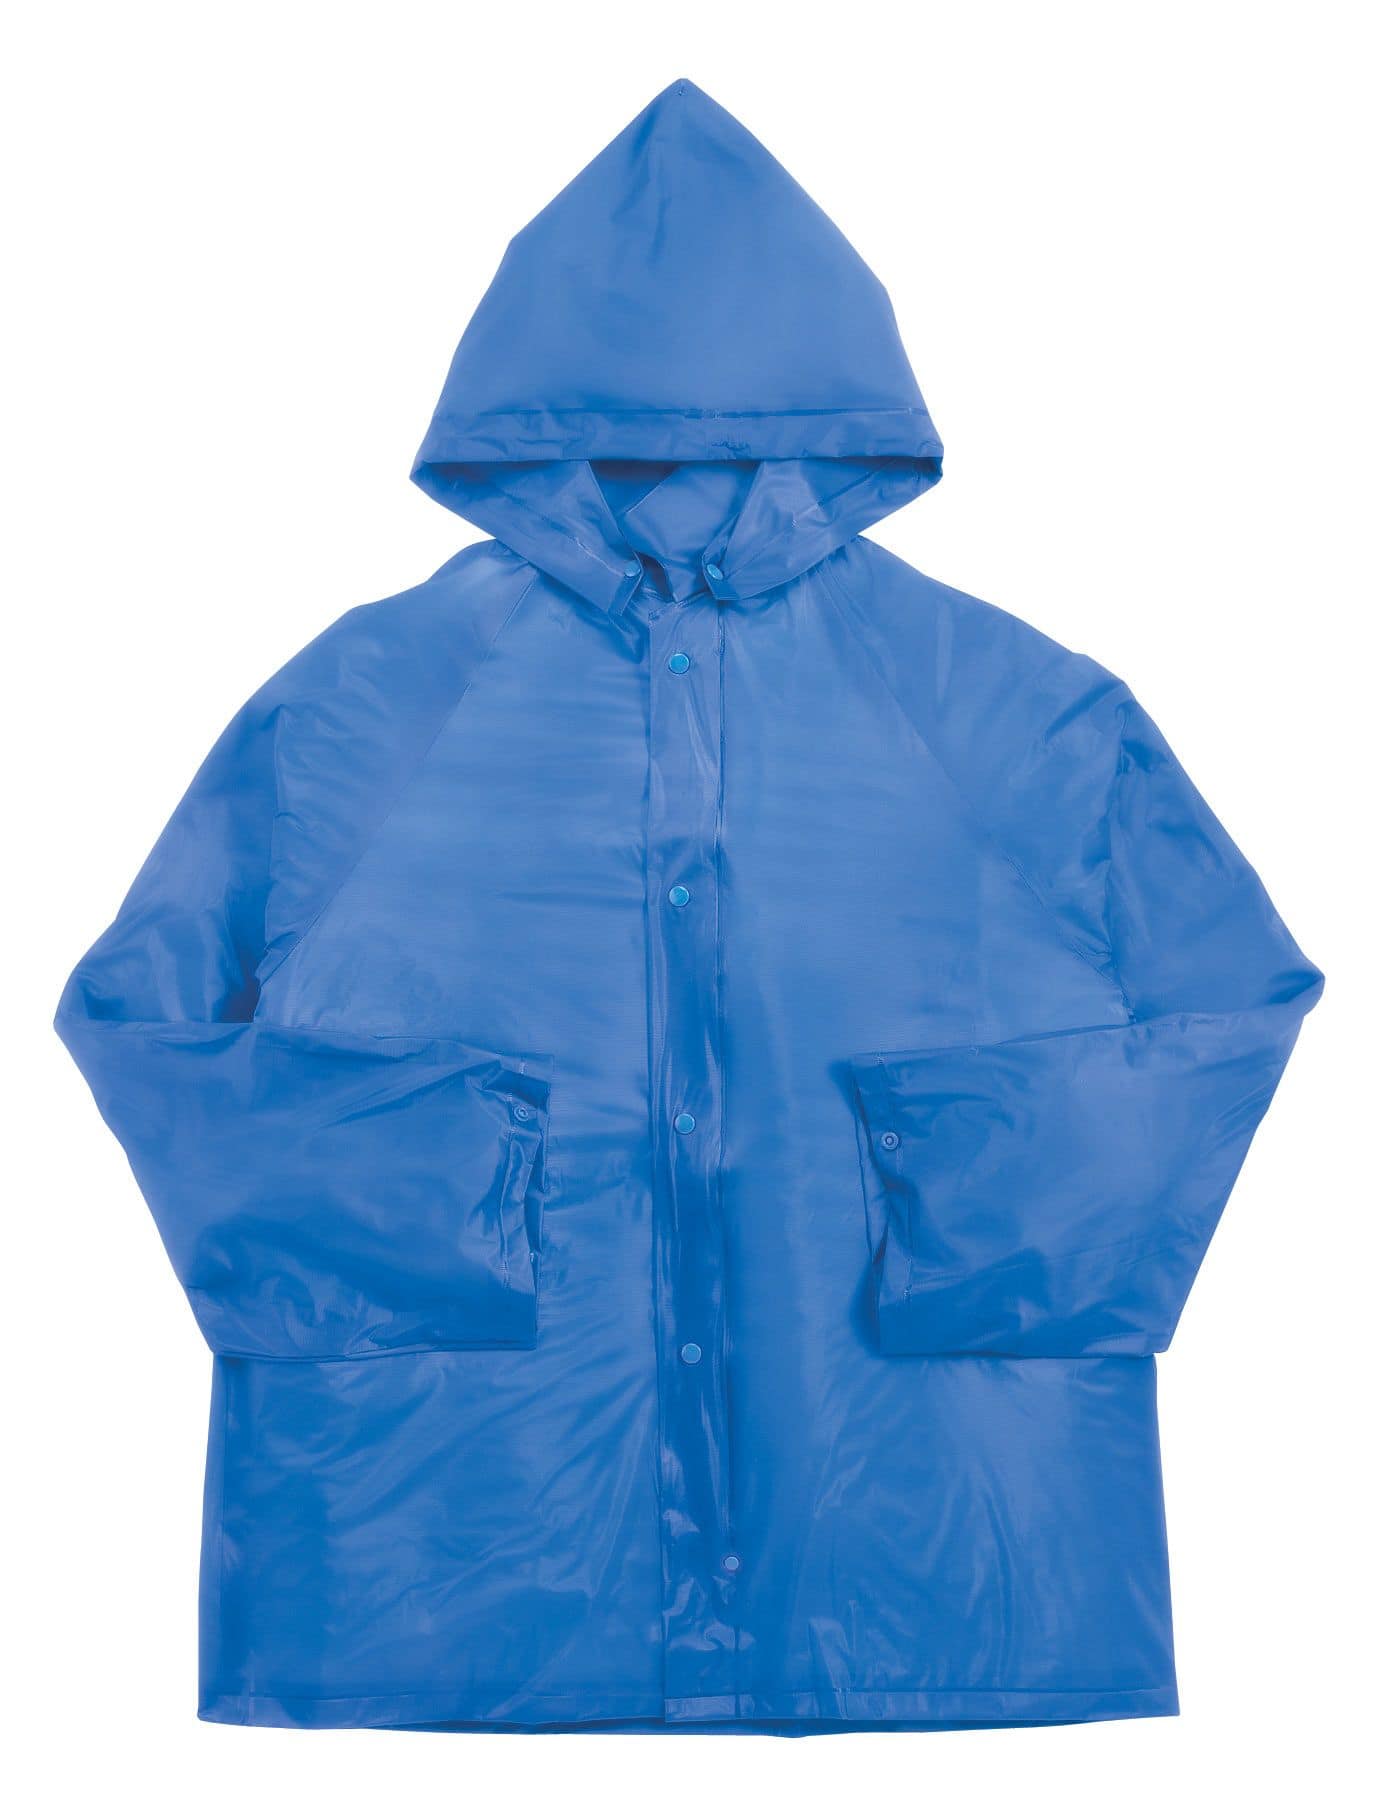 Wetskins Adult Waterproof 2-pc Rainsuit Incl. Jacket, Pants with  Lightweight Lining, Navy